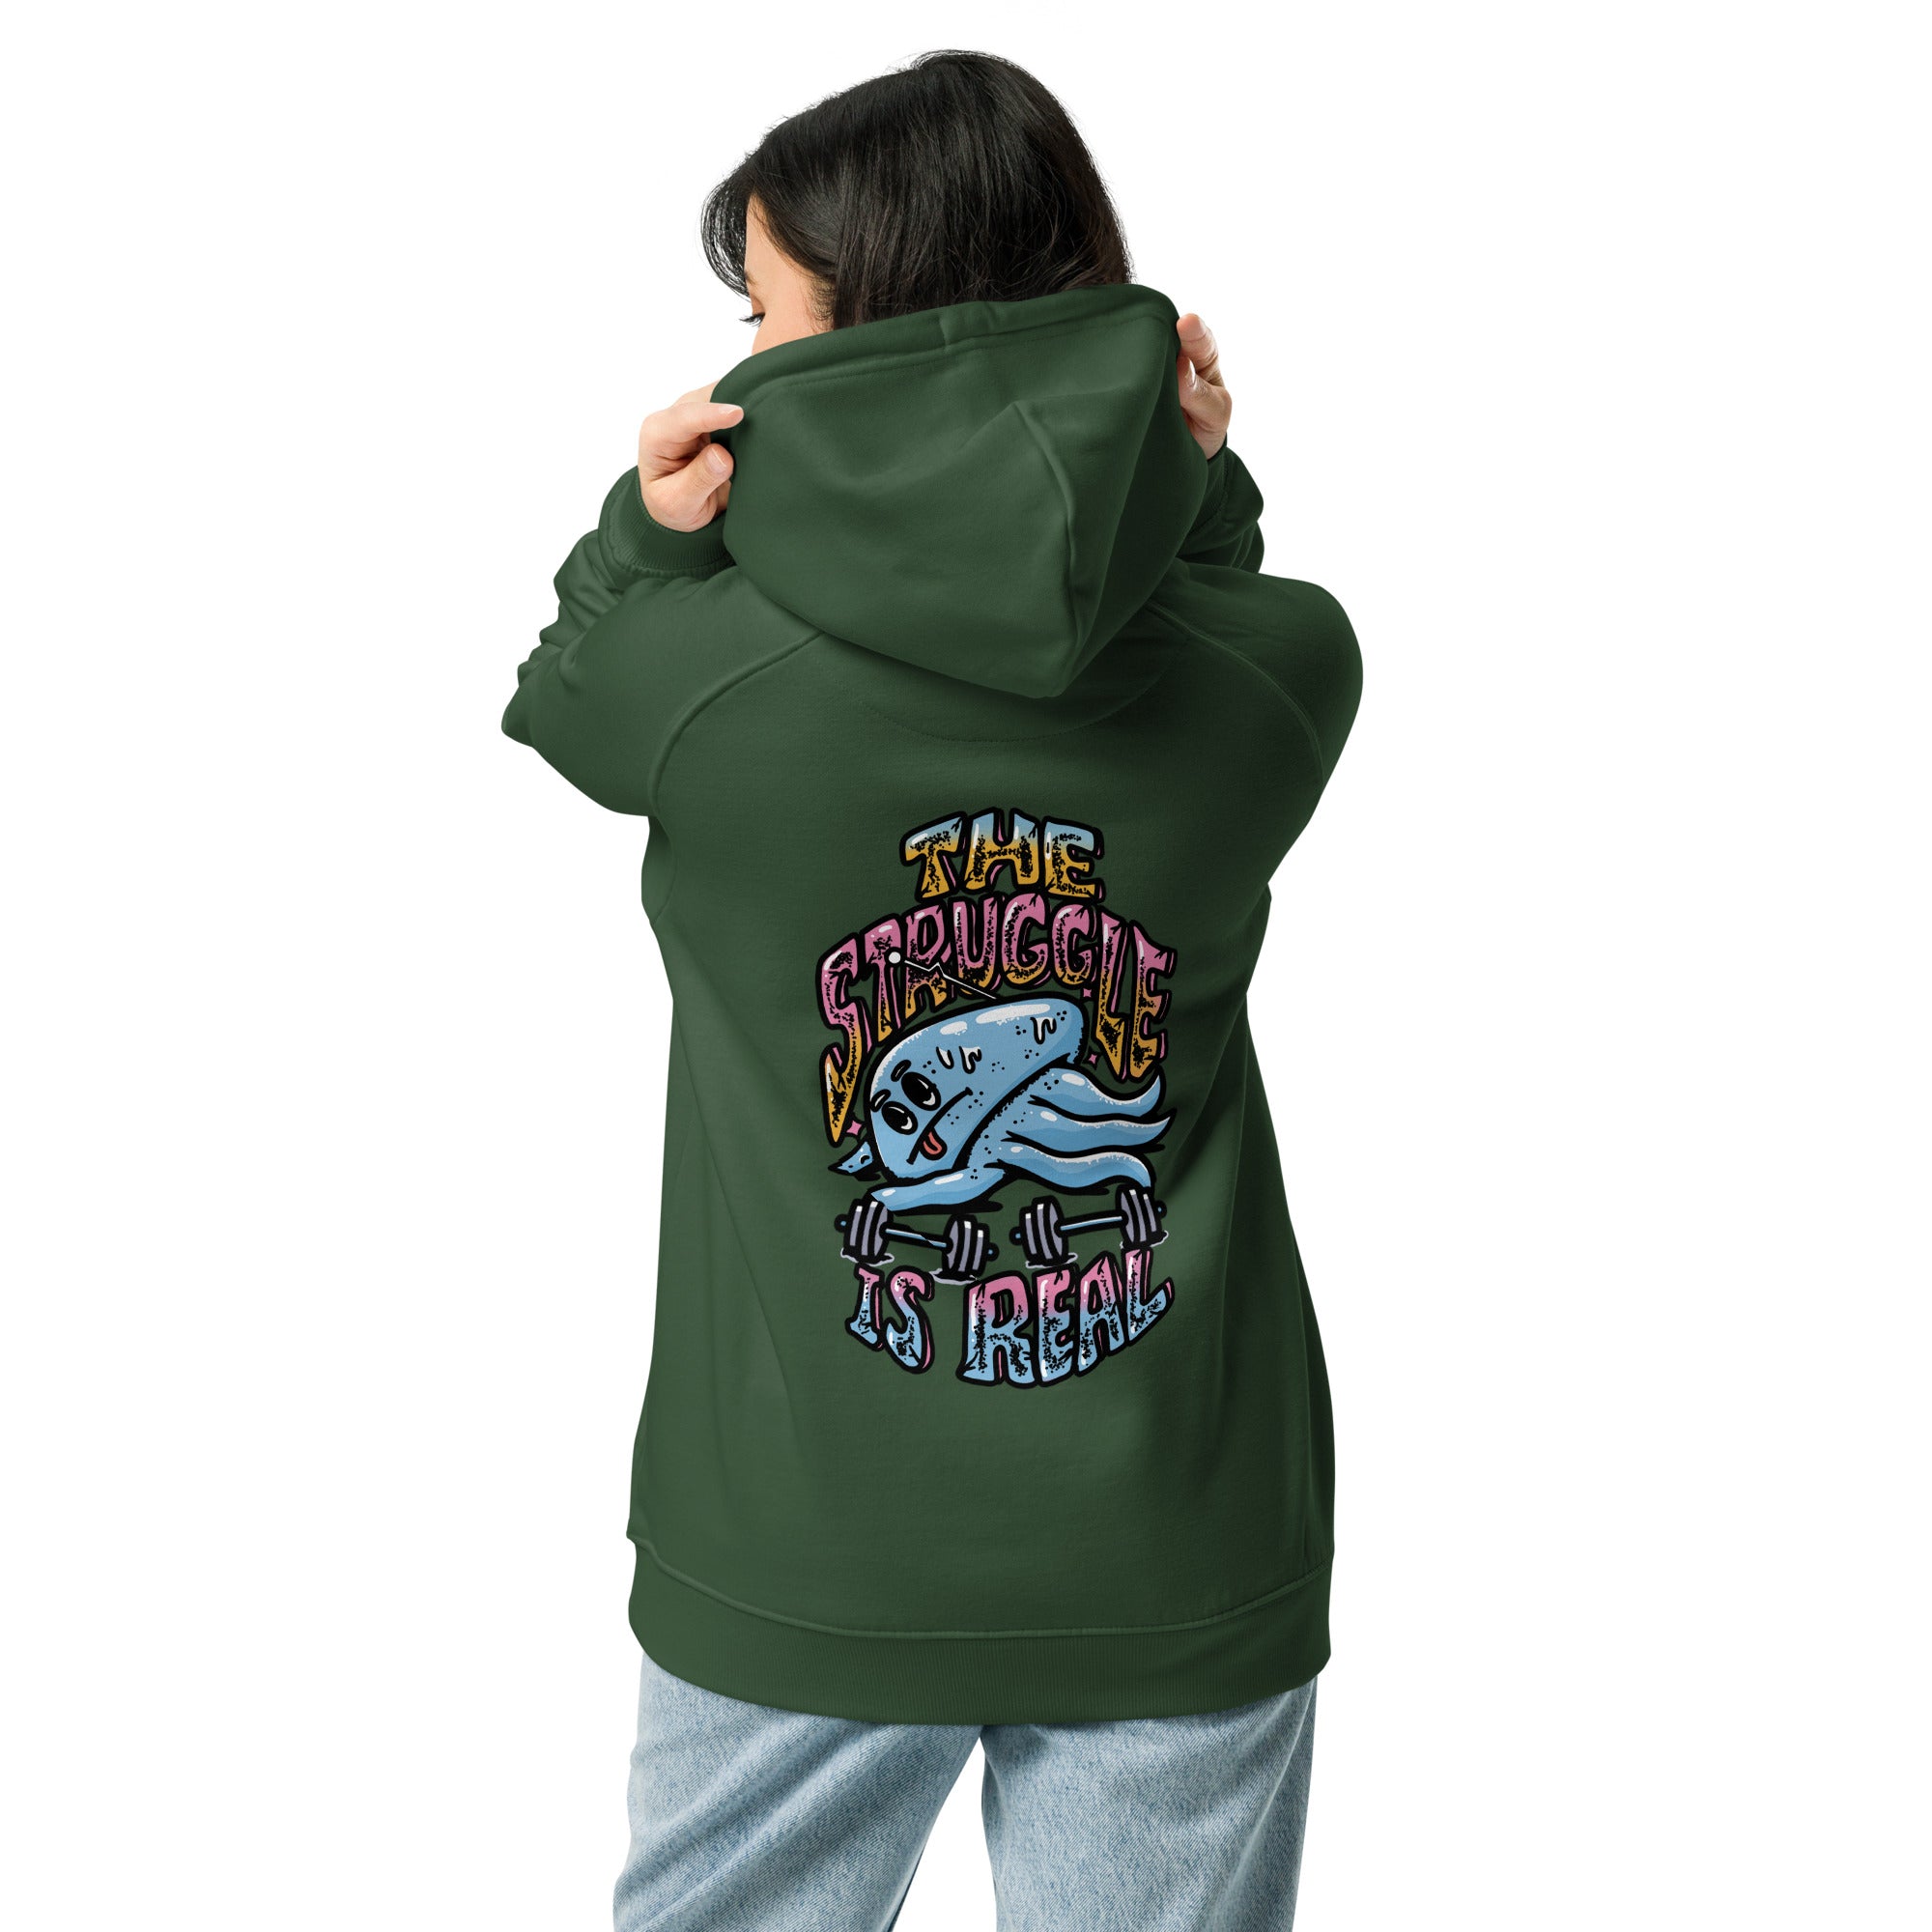 The Struggle is Real - Unisex eco hoodie